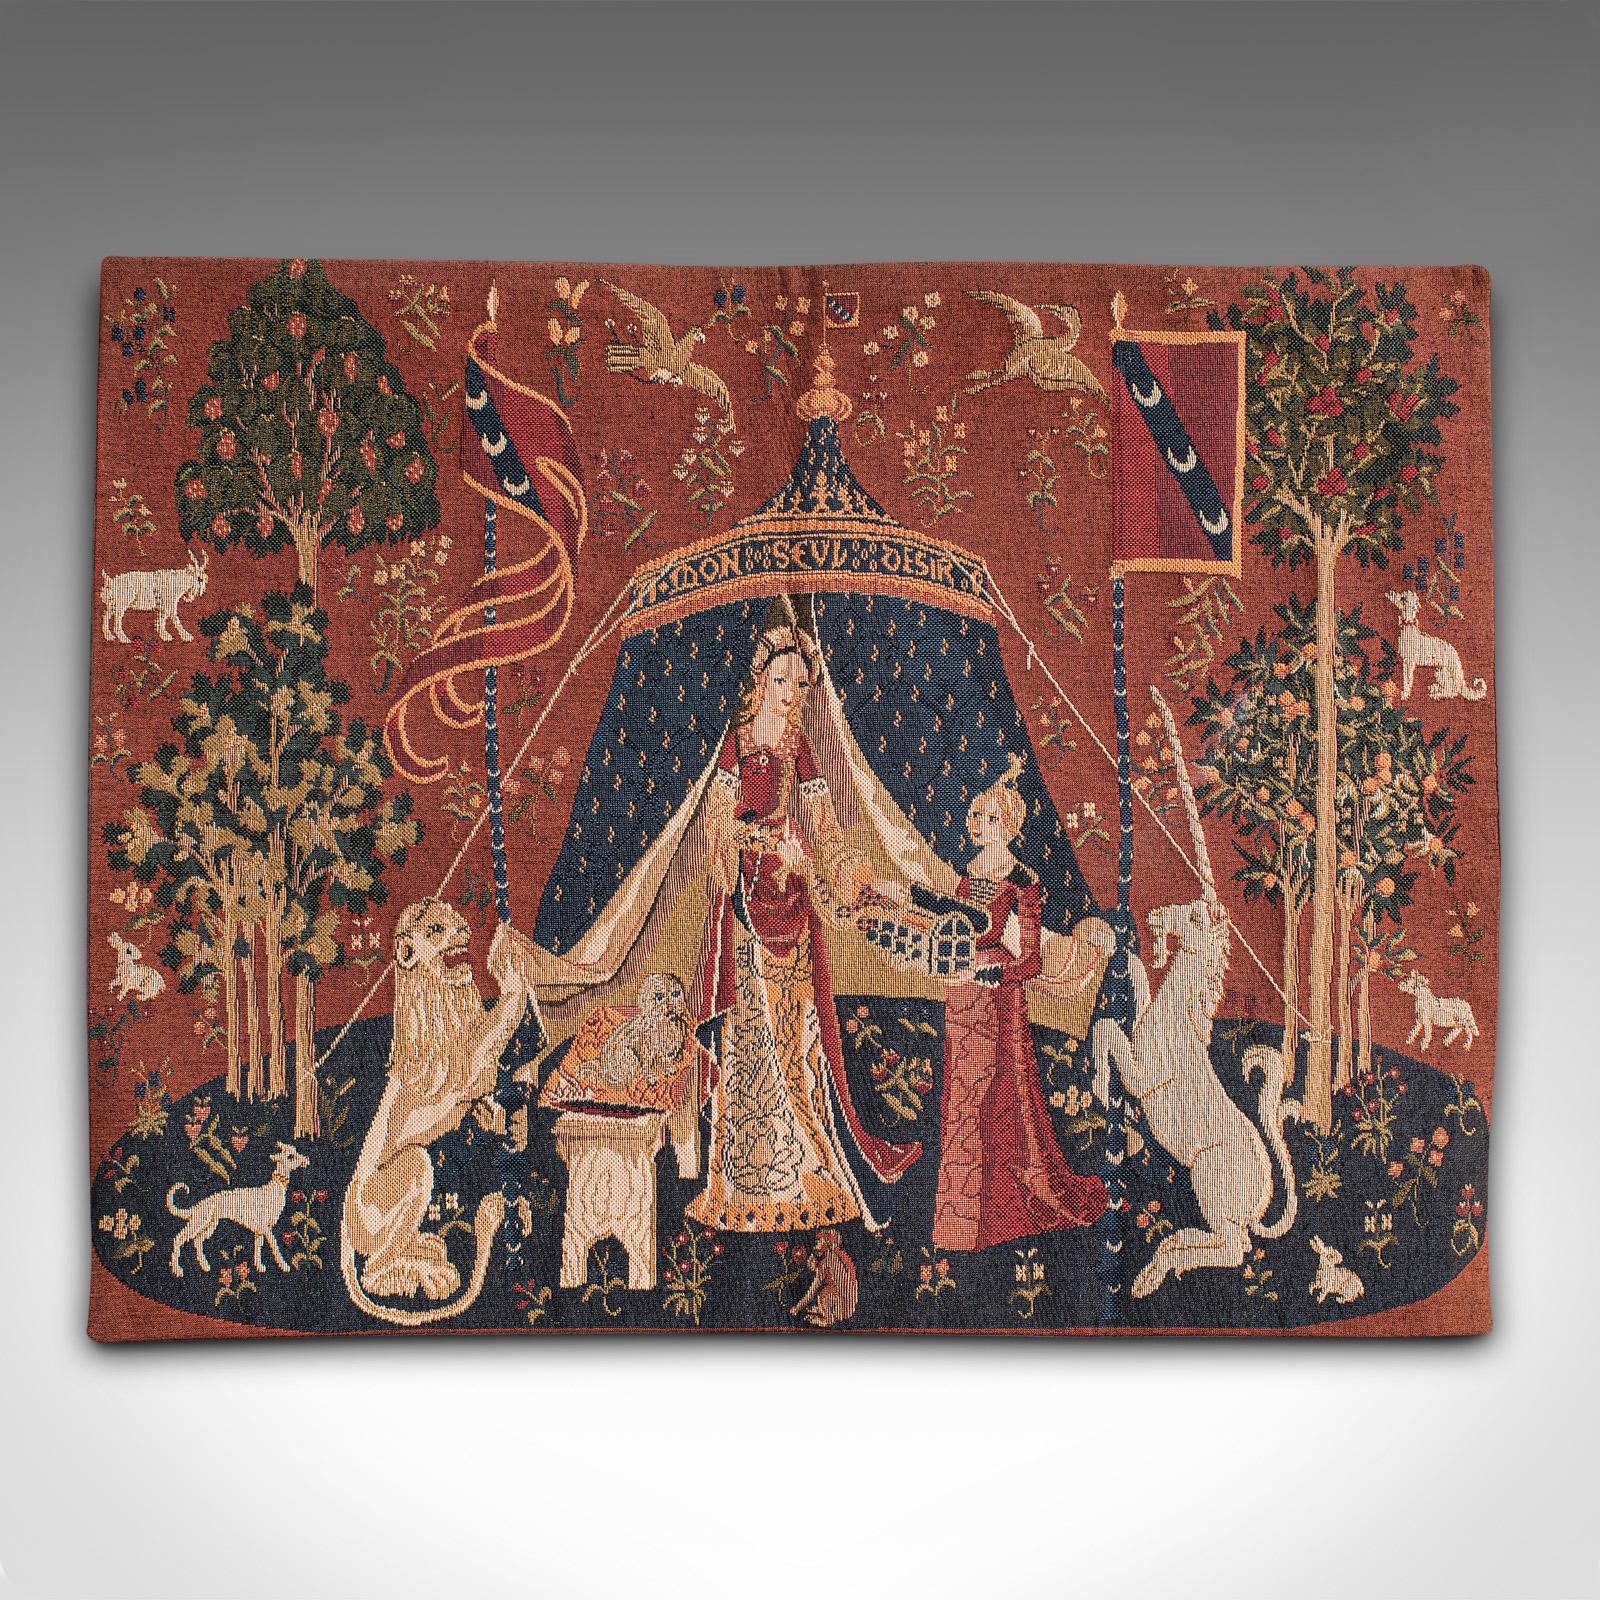 This is a petite vintage tapestry. A French, needlepoint scene depicting The Lady and the Unicorn, dating to the late 20th century, circa 1980.

Of compact proportion, this tapestry is a quality recreation of the 15th century renaissance series of